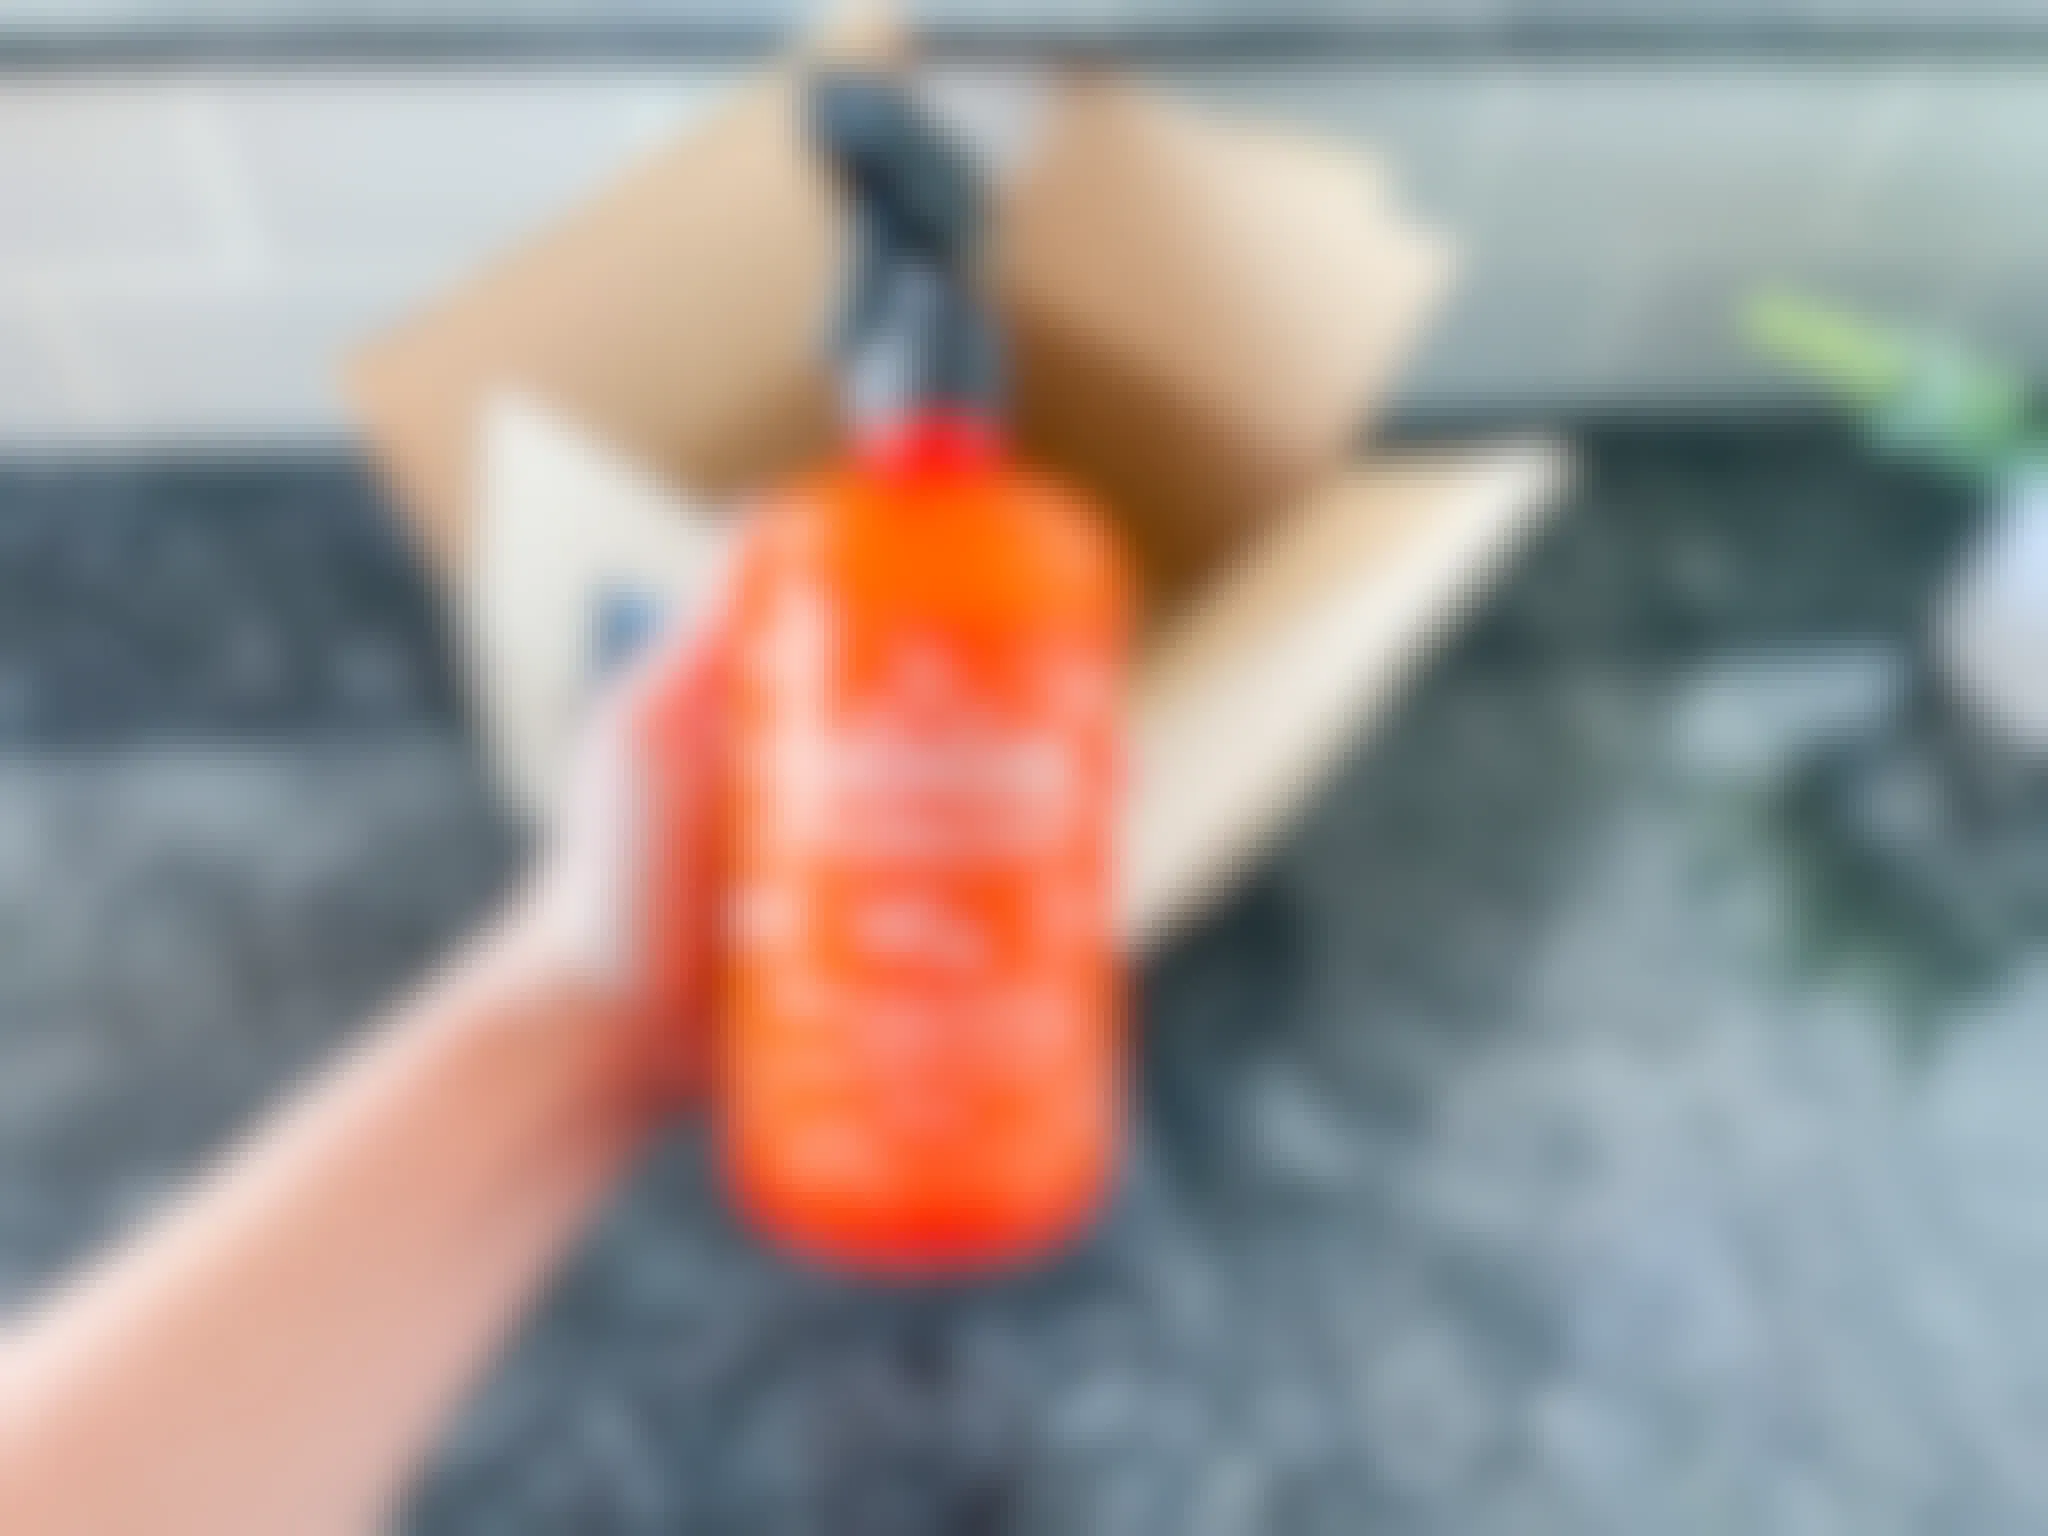 A hand holding an Angry Orange spray in front of an open delivery box.